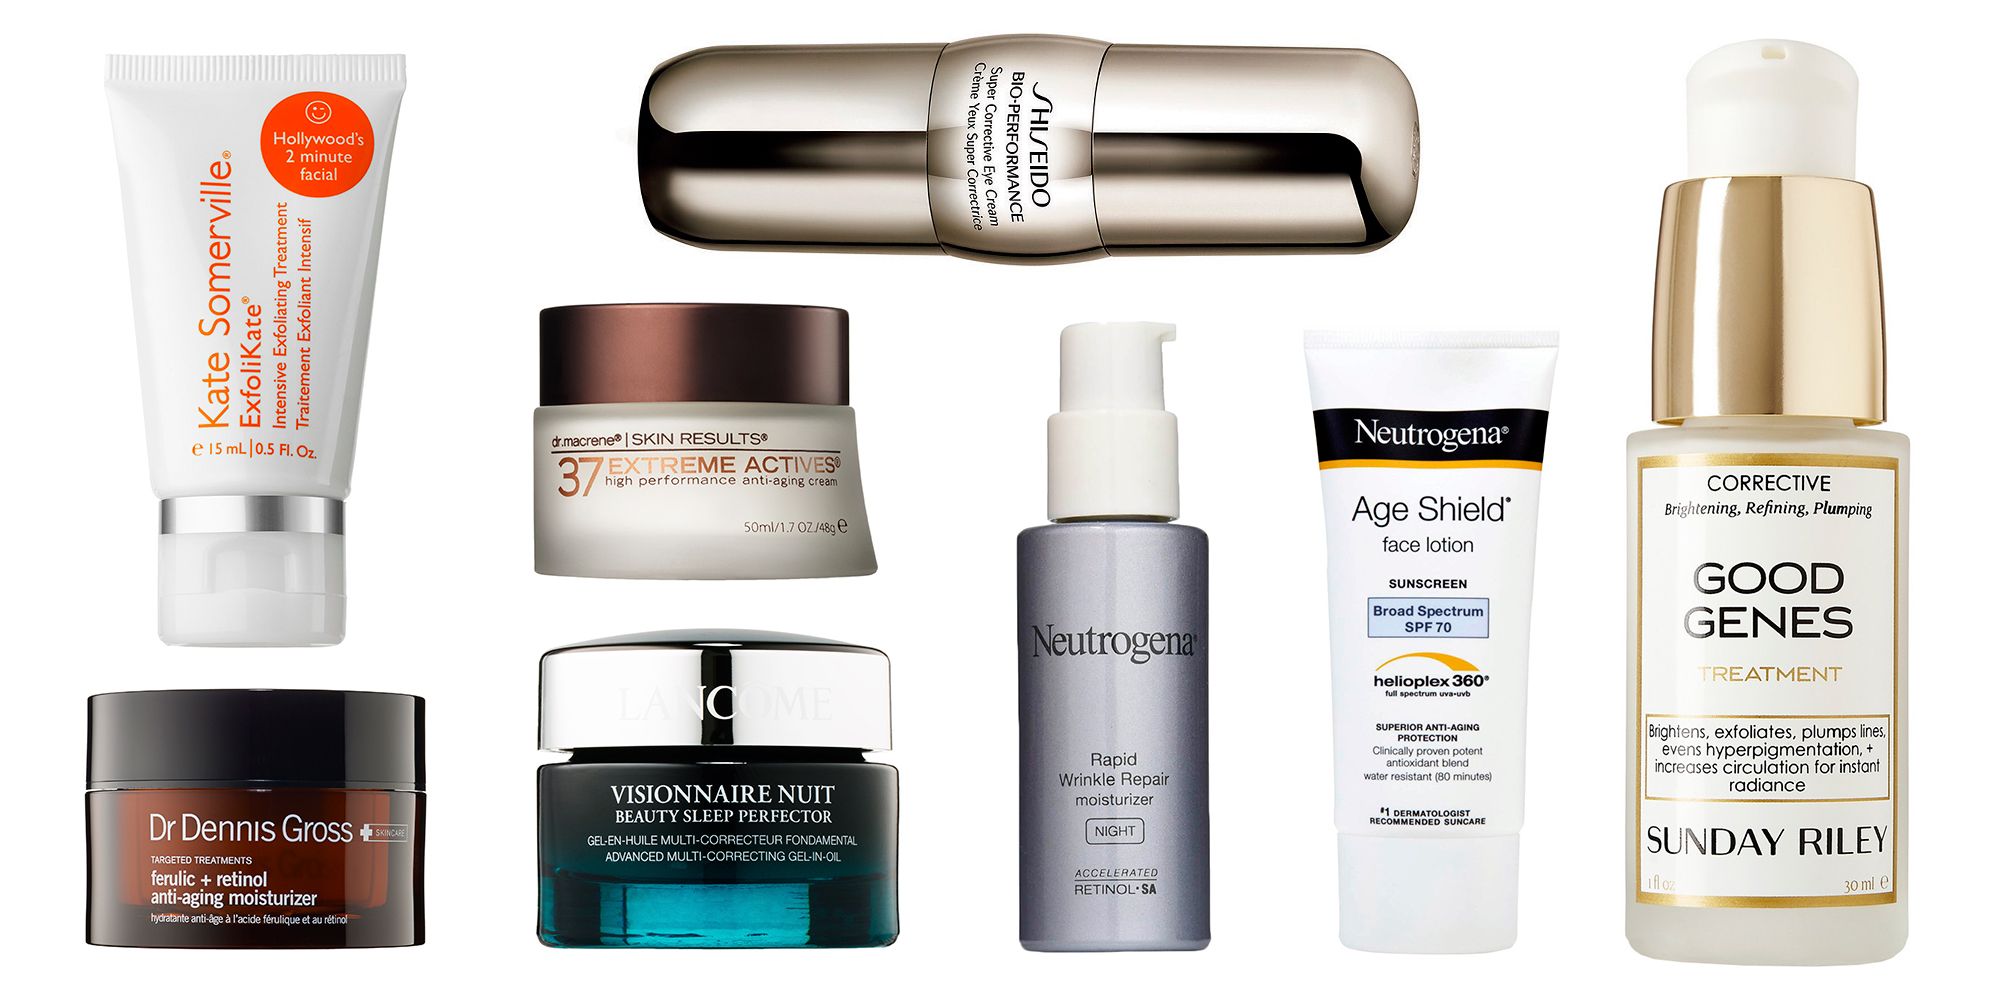 The 7 Best Anti-Wrinkle Creams According to  Editors